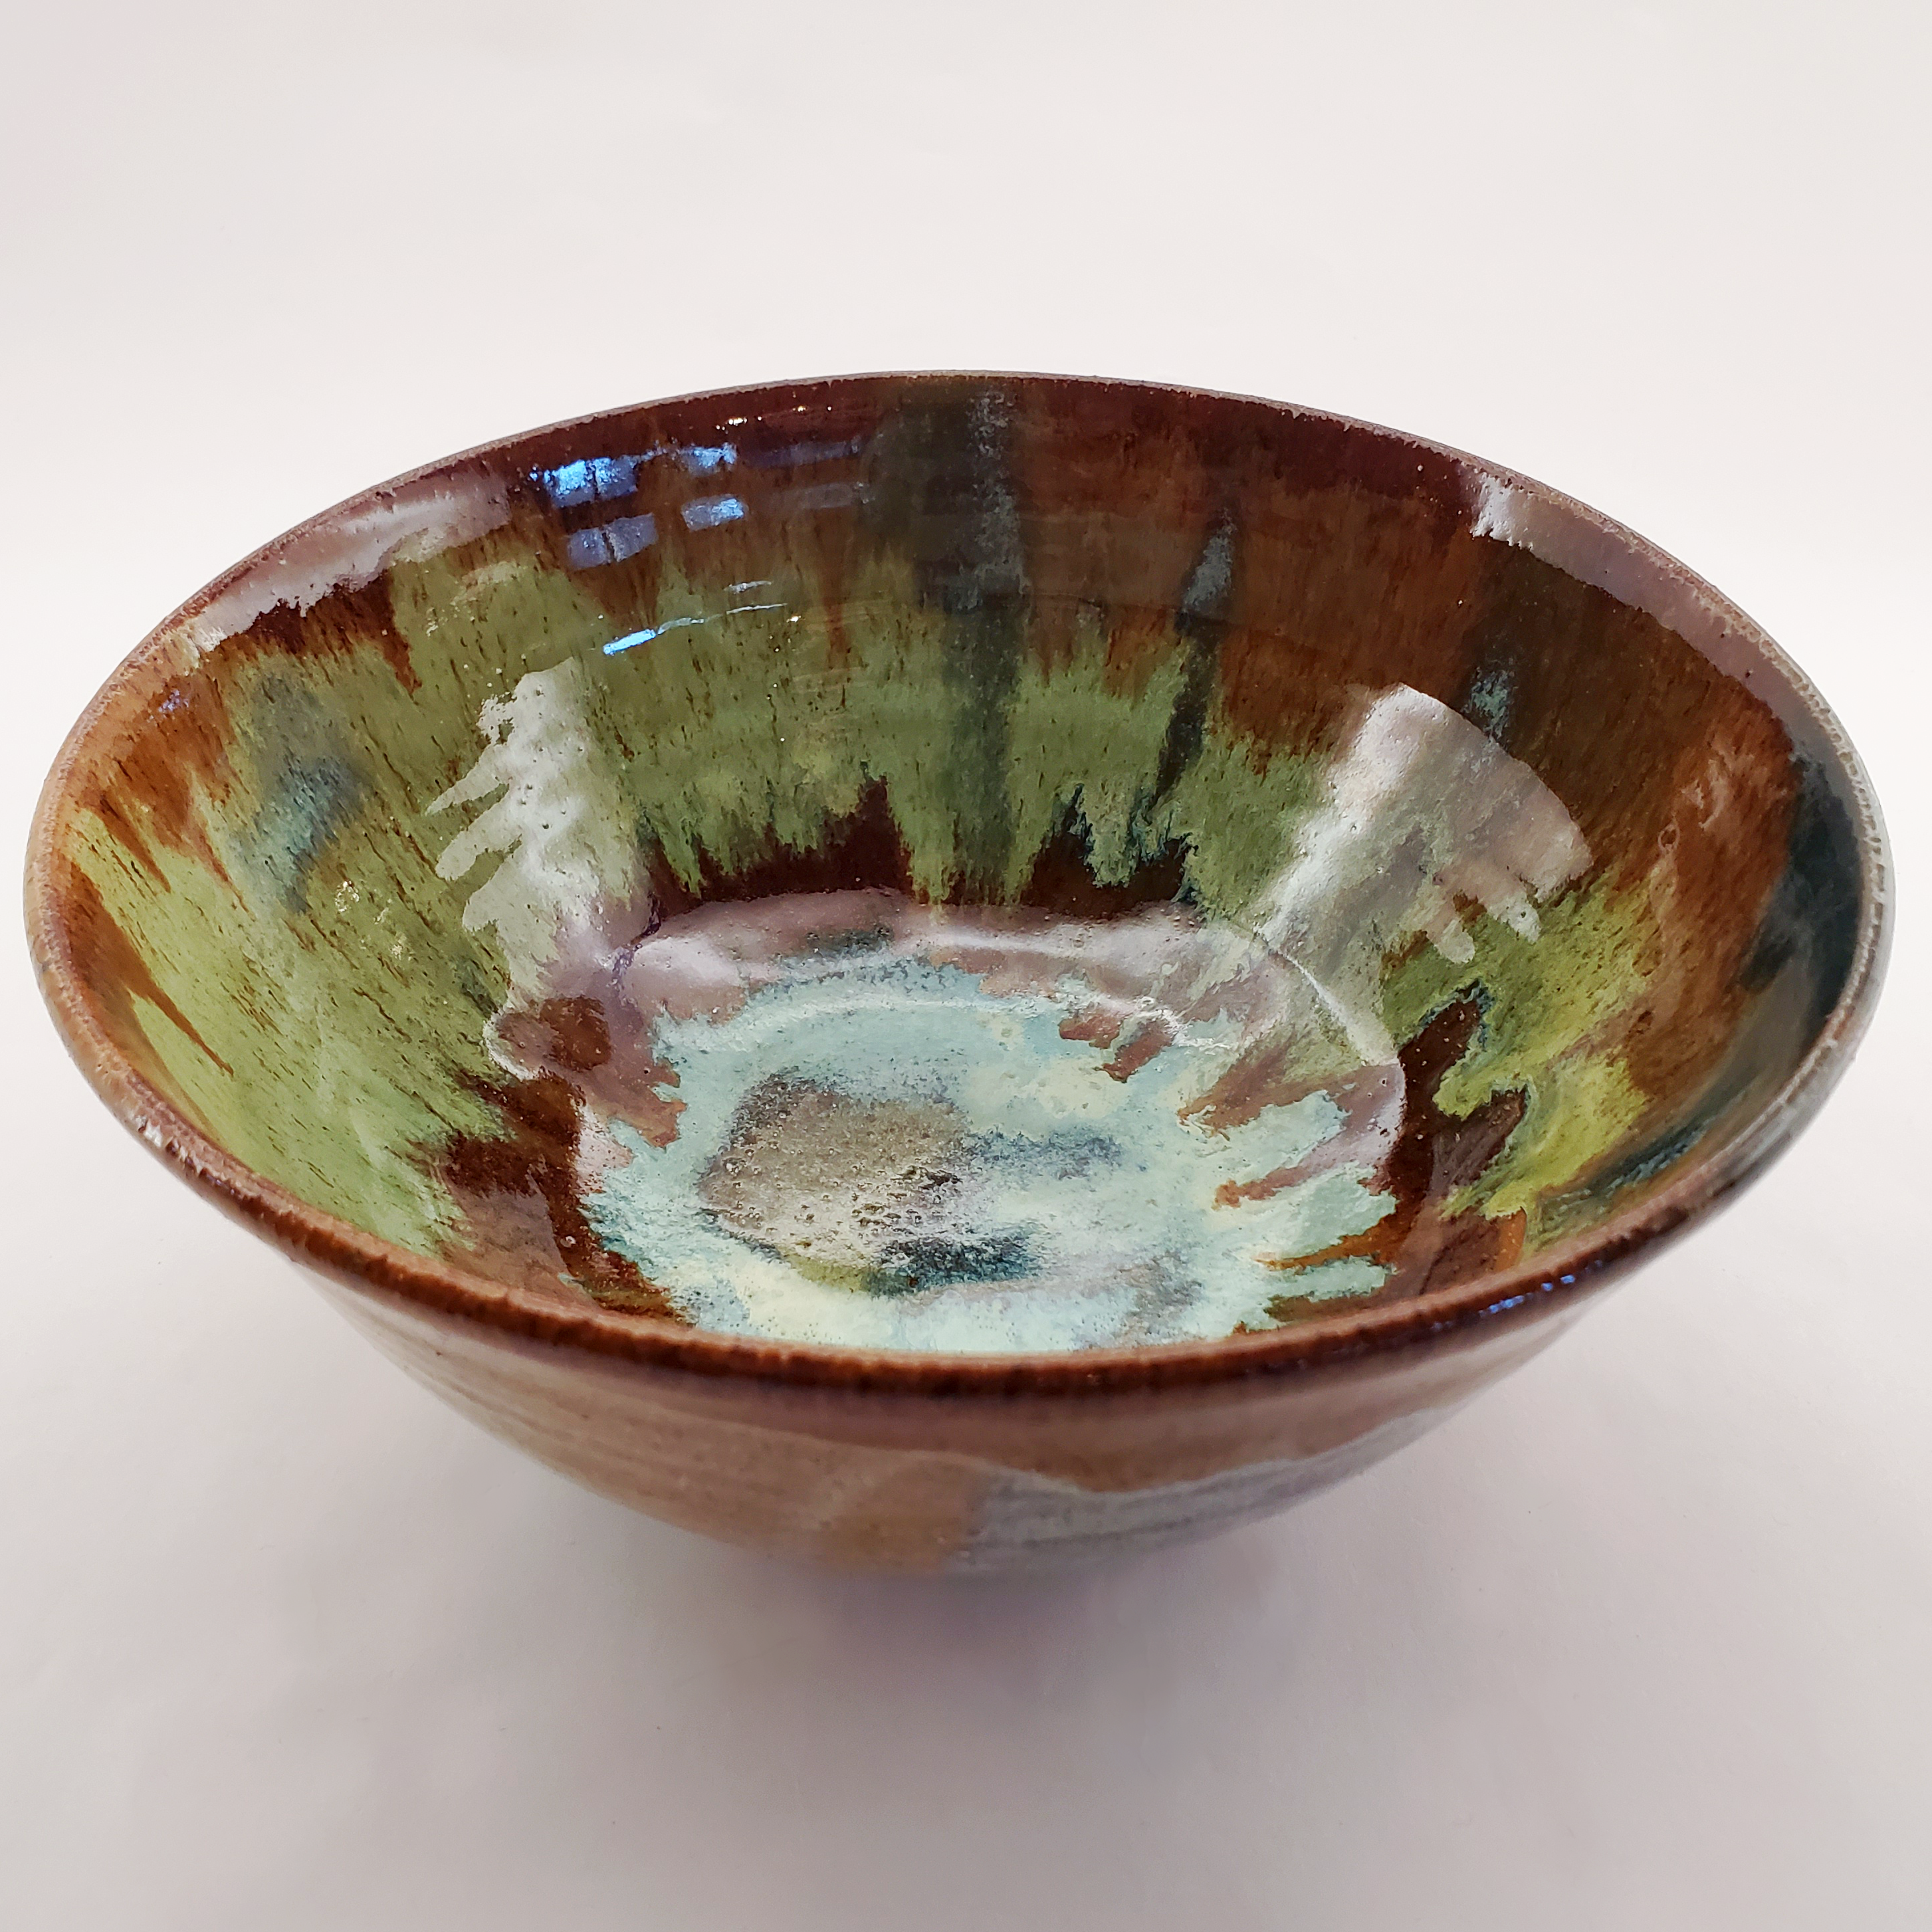 Beautiful Feathered style bowl glazed in greens and browns. Handmade on Vashon Island by Abraham McBride Pottery. Local ceramics artist, Seattle Washington. Small business, Made in the USA. 